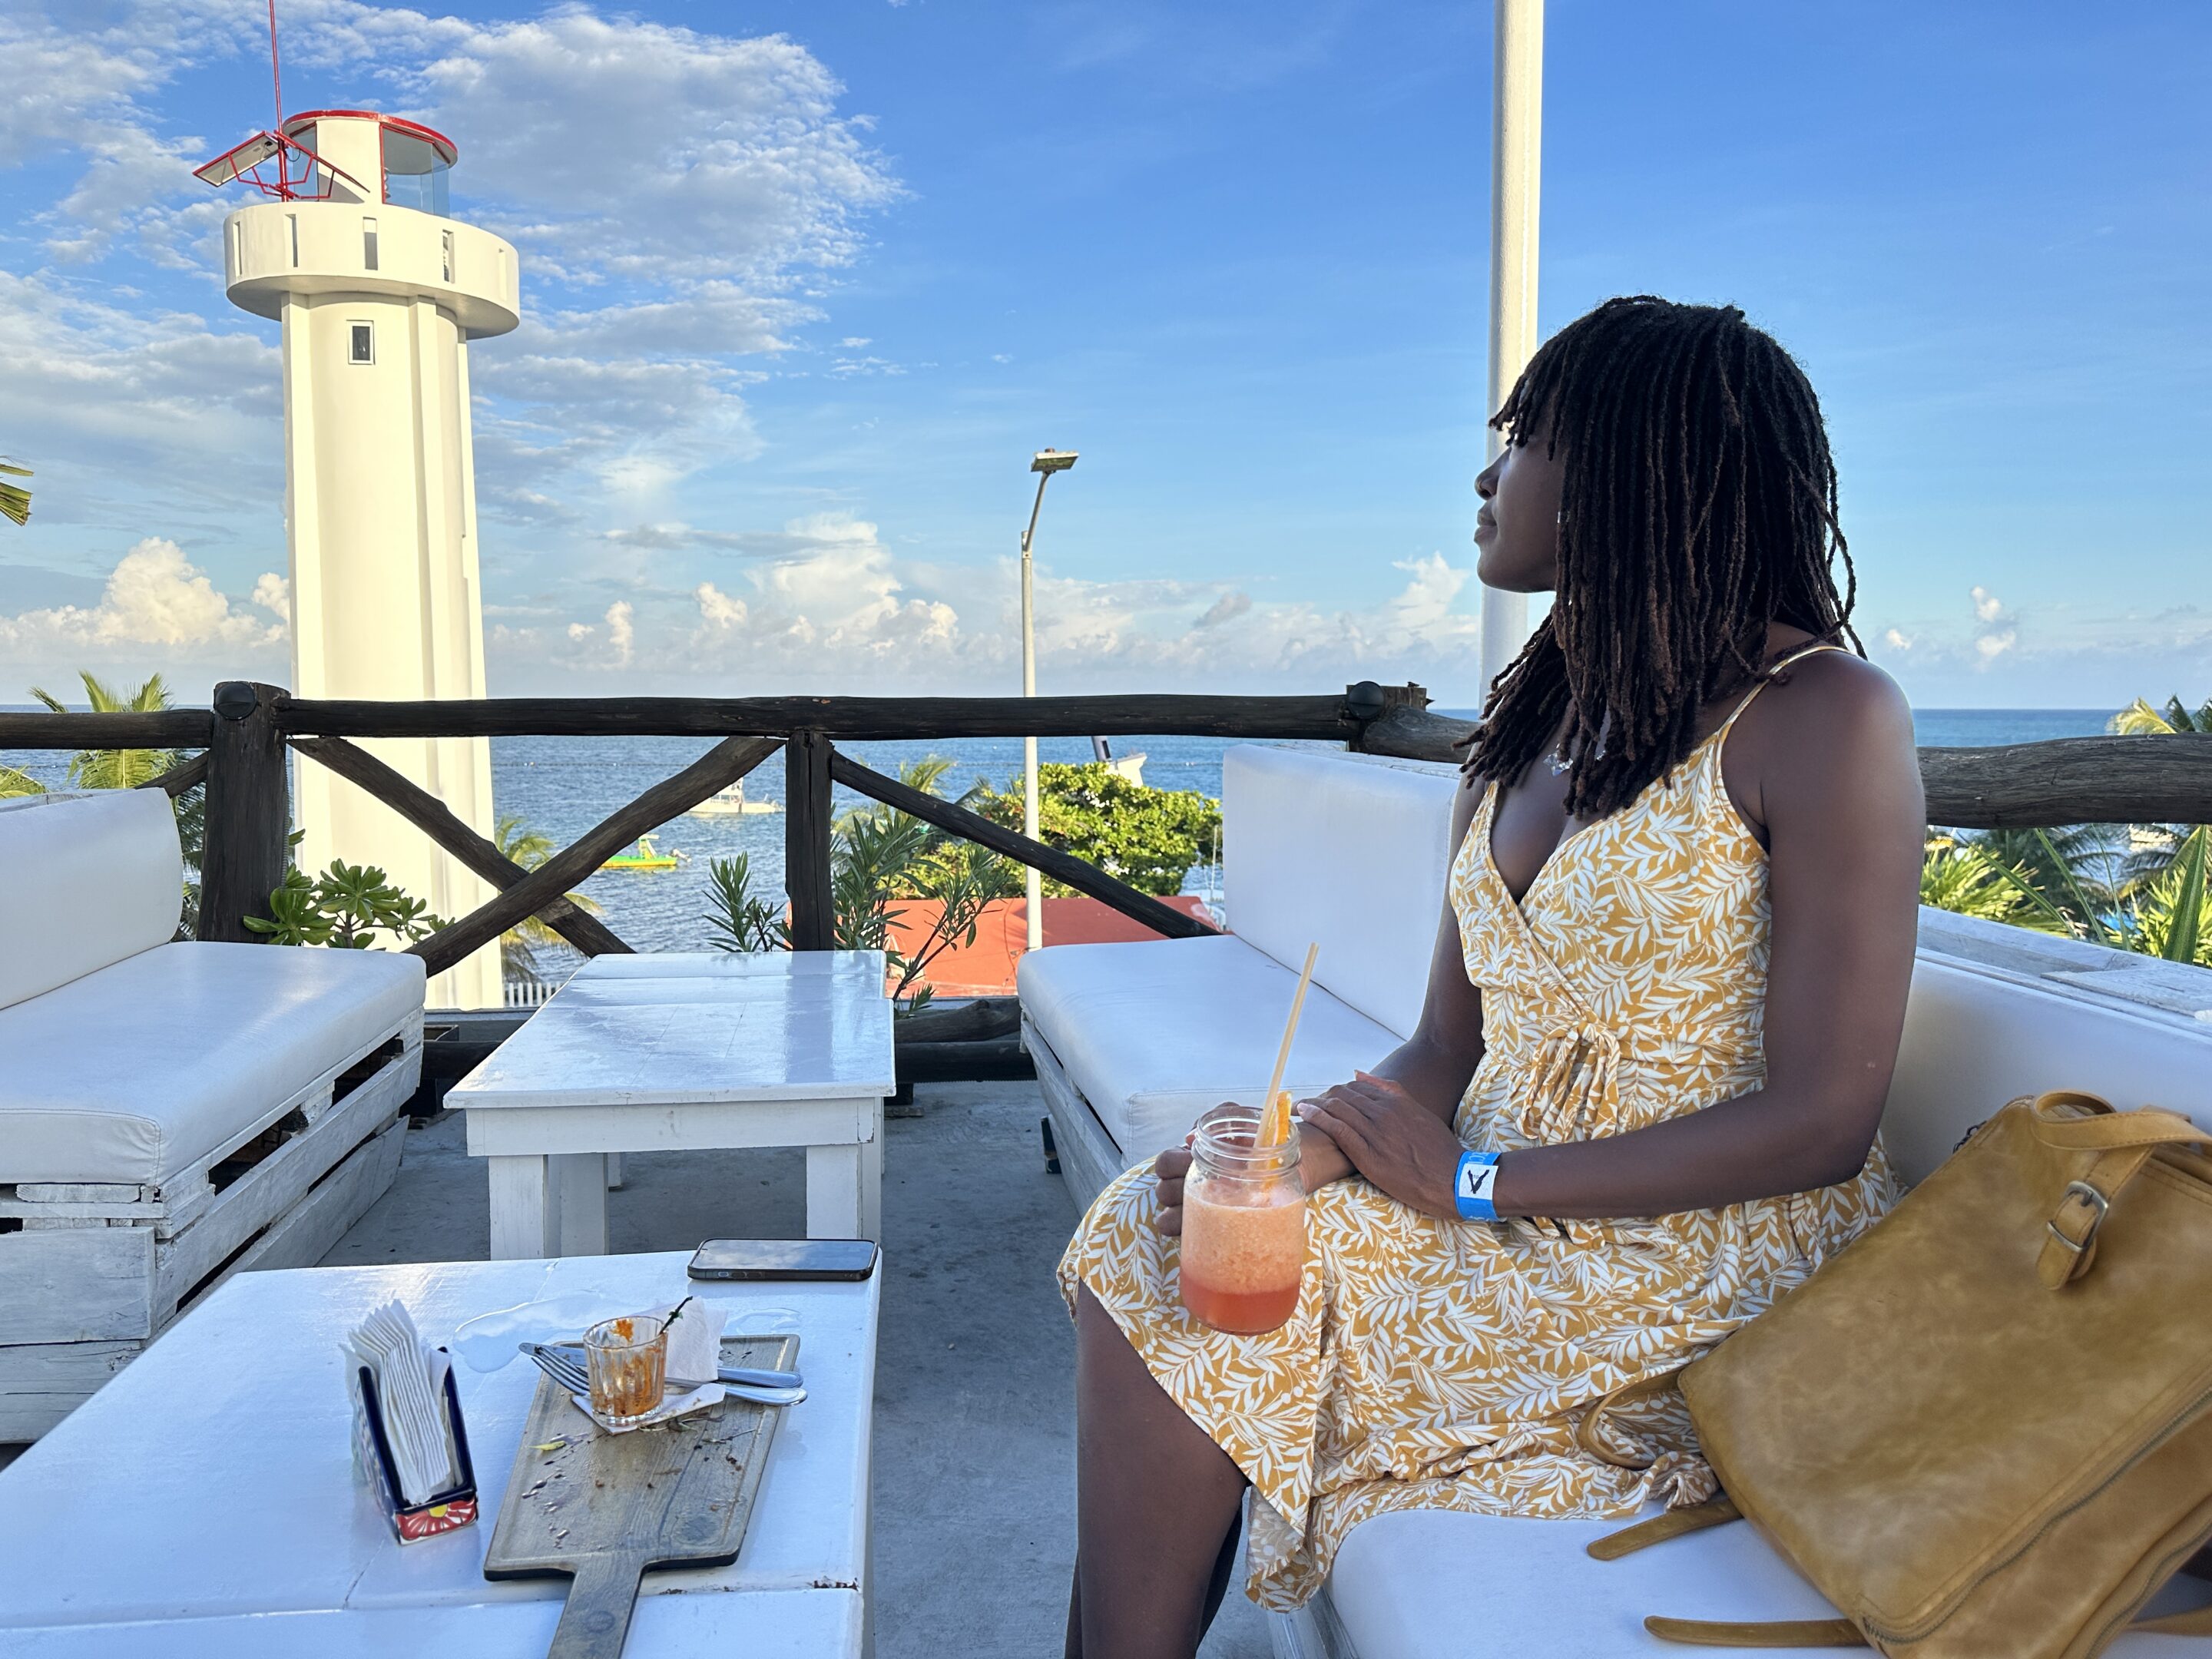 A woman sitting on the rooftop at La Sirena enjoying a cocktail and the view of the lighthouse and the ocean in the background.